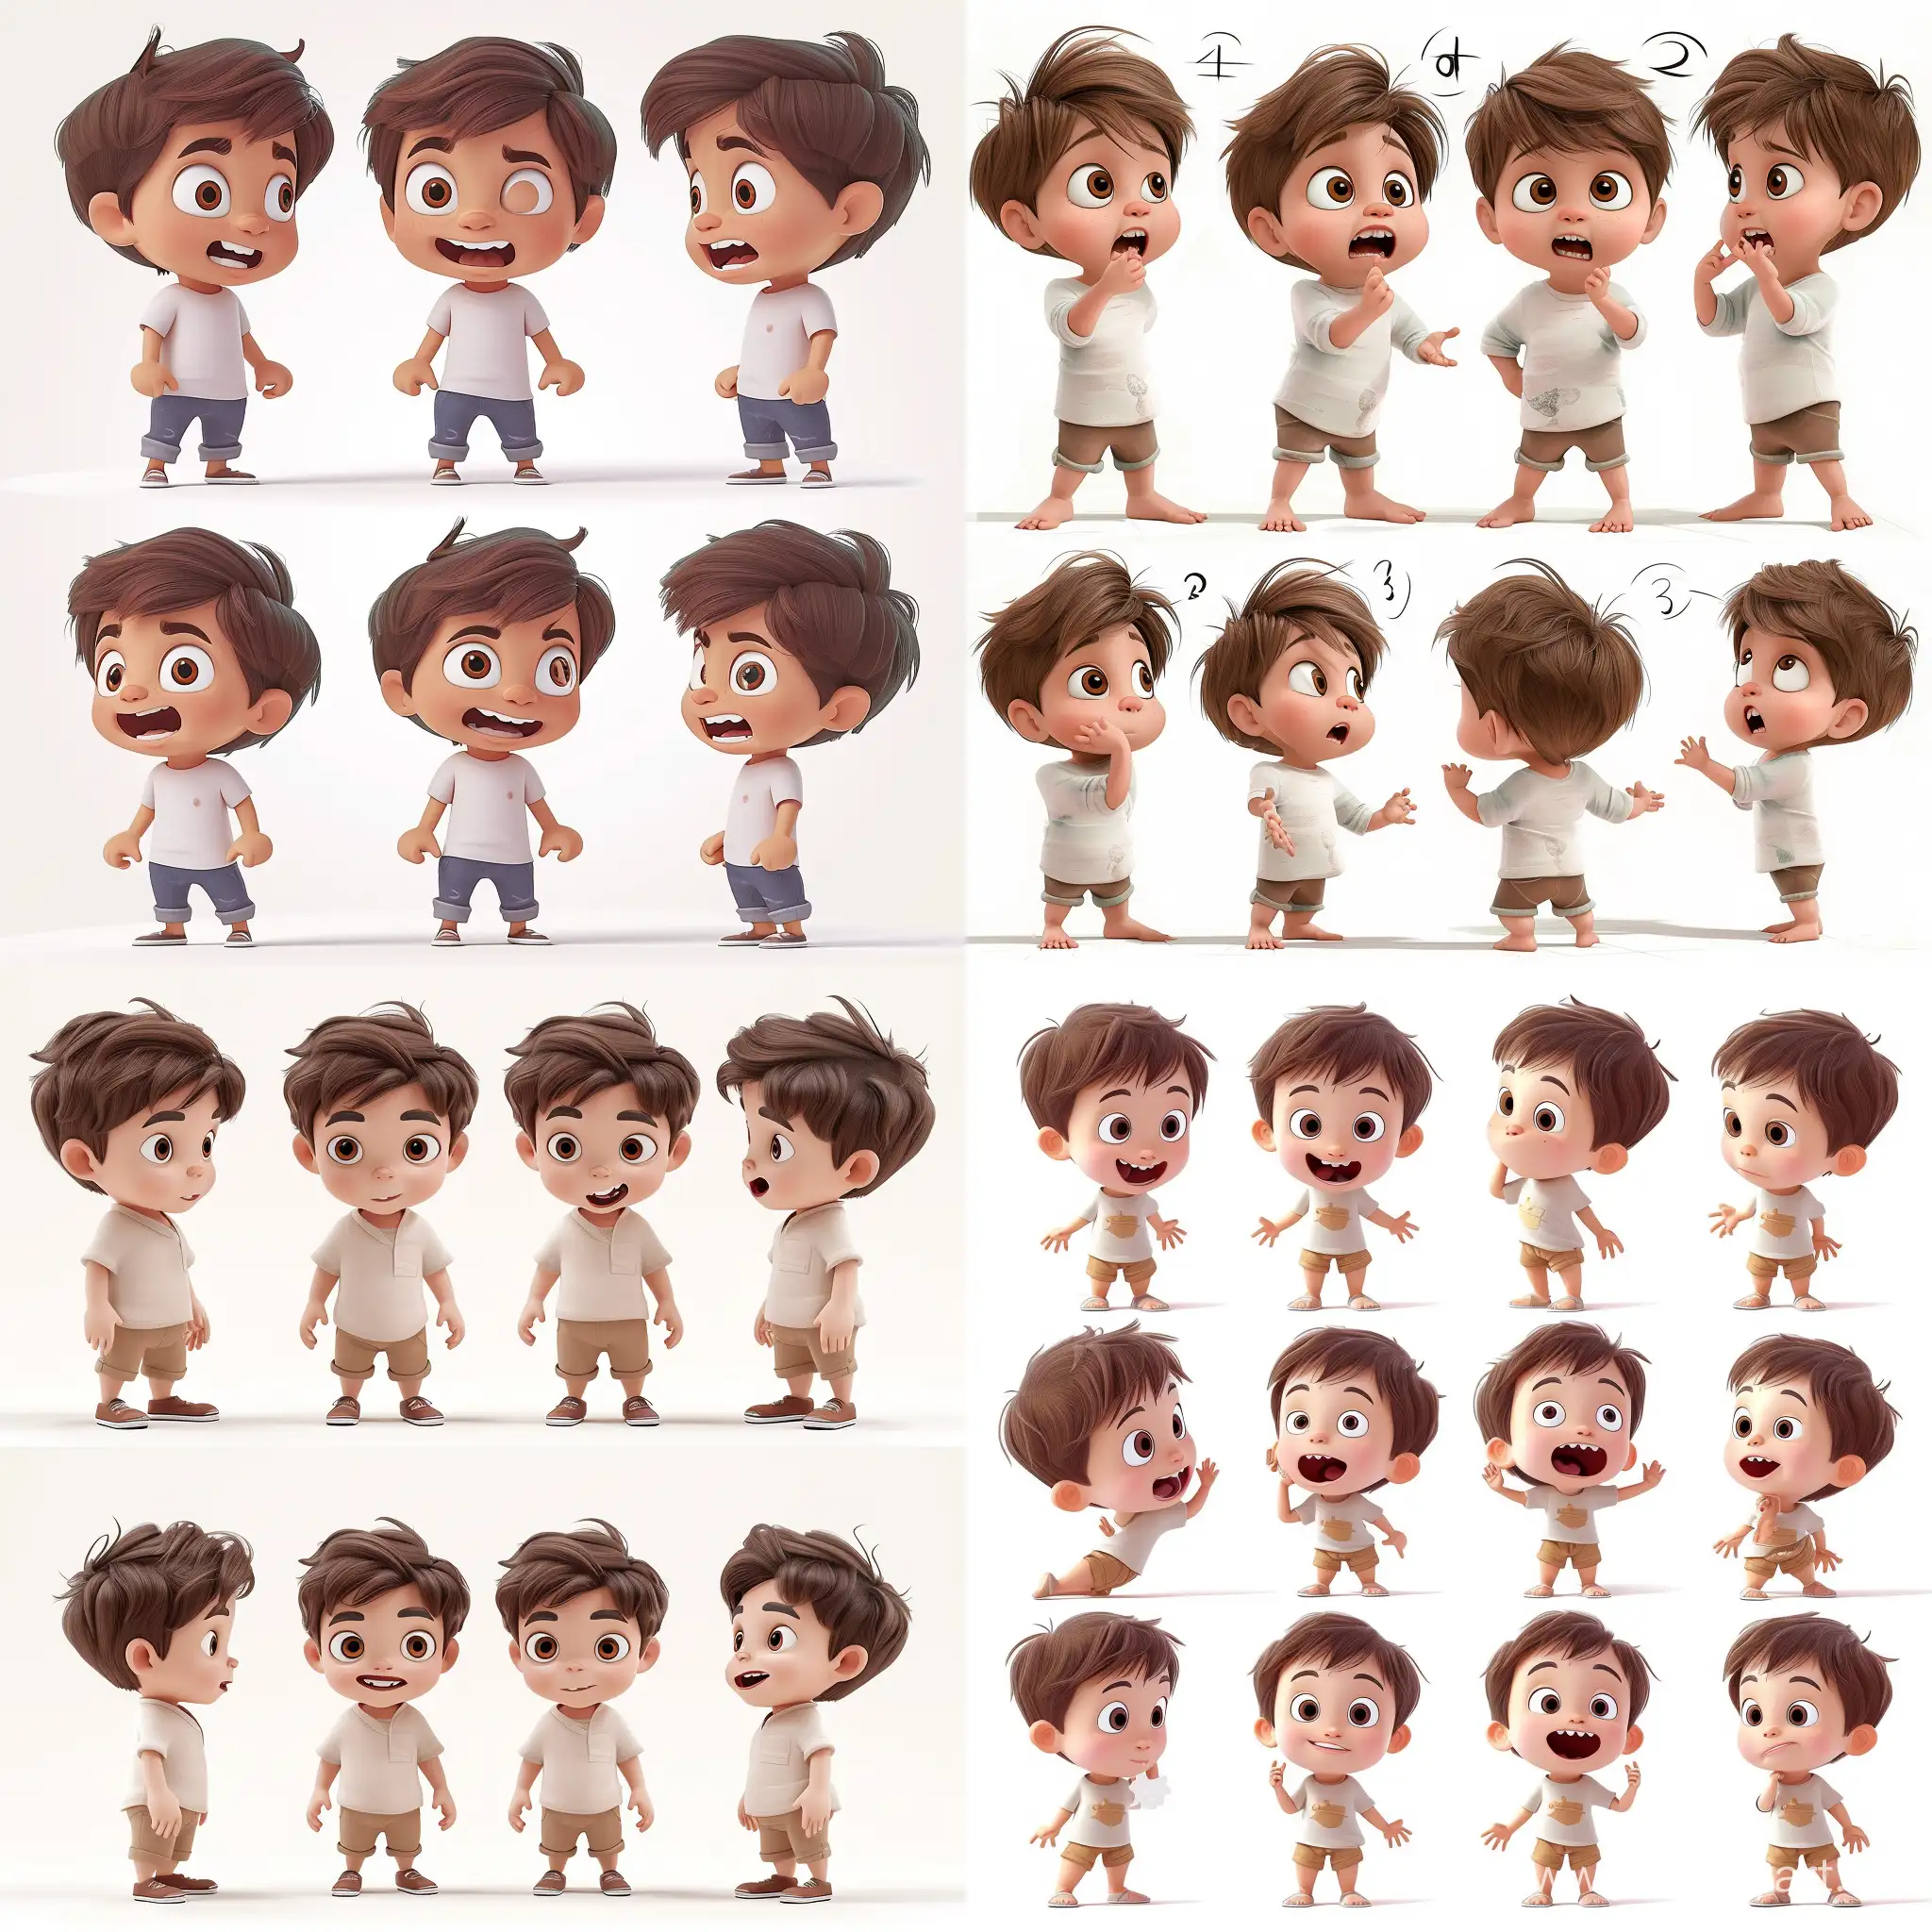 Adorable-BrownHaired-OneYearOld-Expressions-in-3D-Cartoon-Illustration